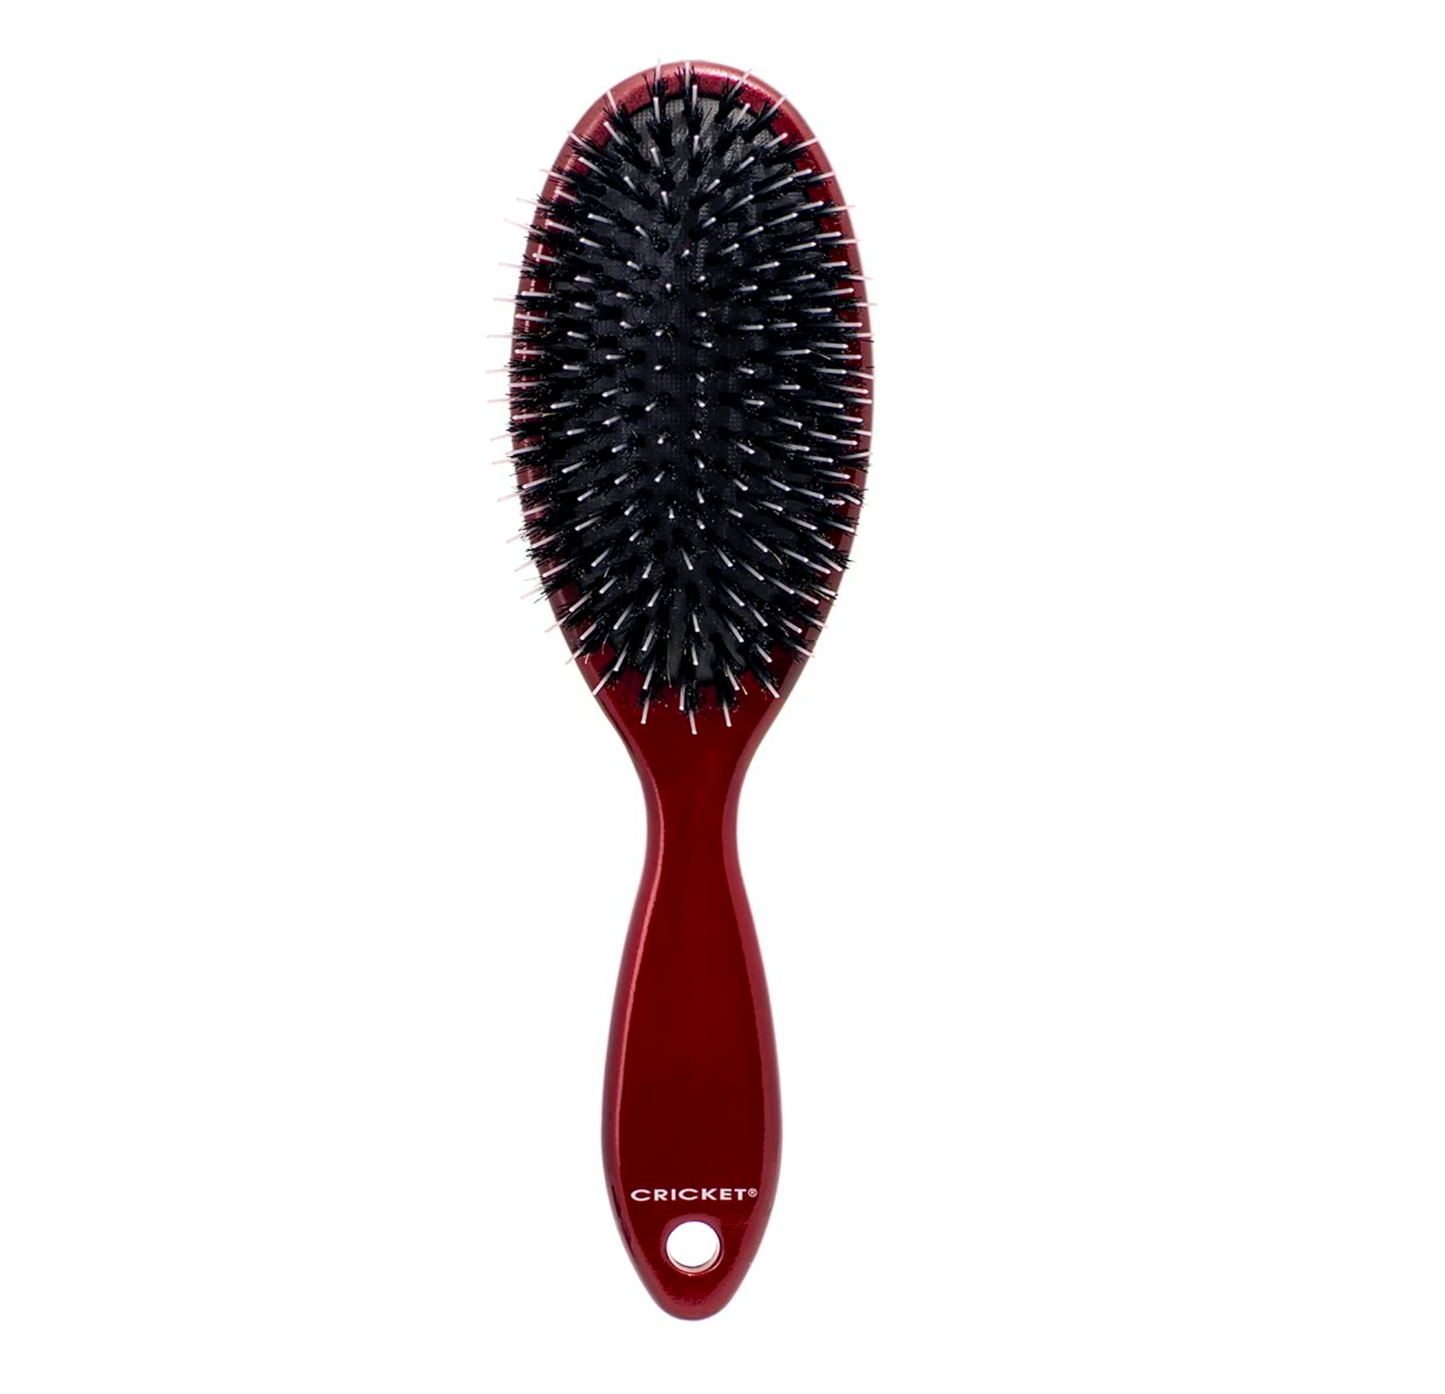 Cricket Smoothing Boar Mix Hair Brush - Boar & Nylon Bristles for Styling & Smoothing